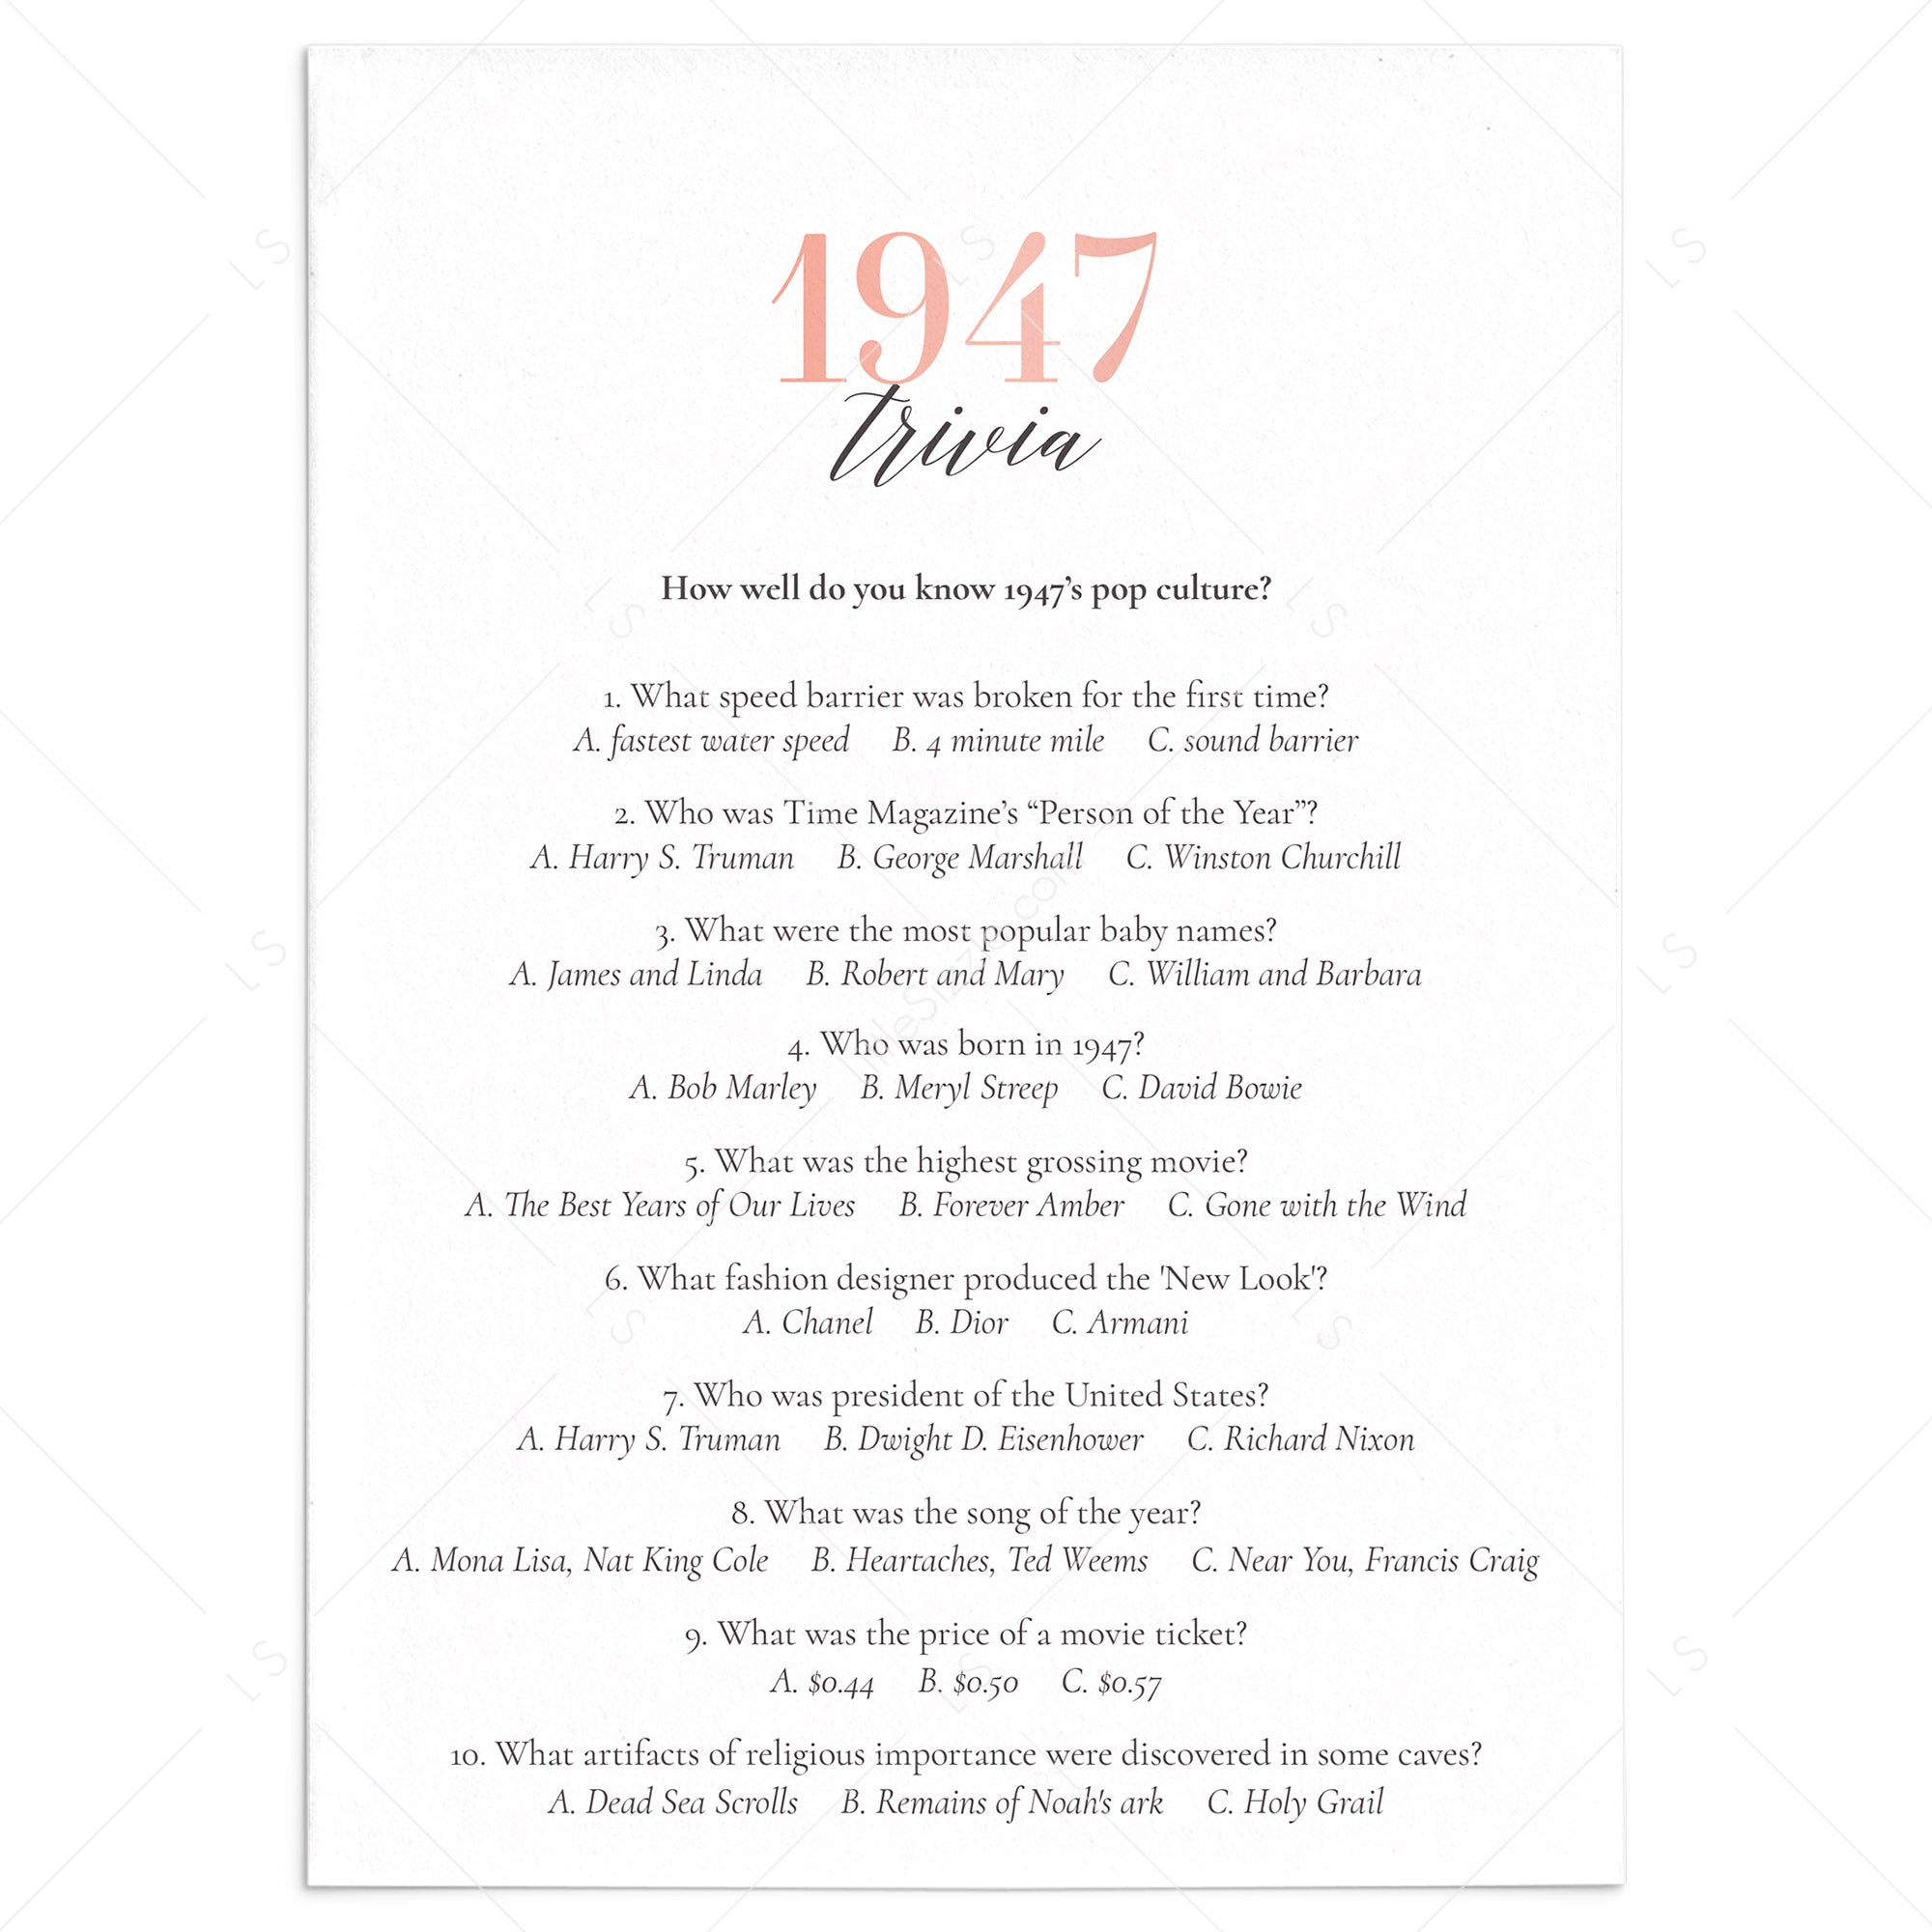 1947 Trivia Questions and Answers Printable by LittleSizzle